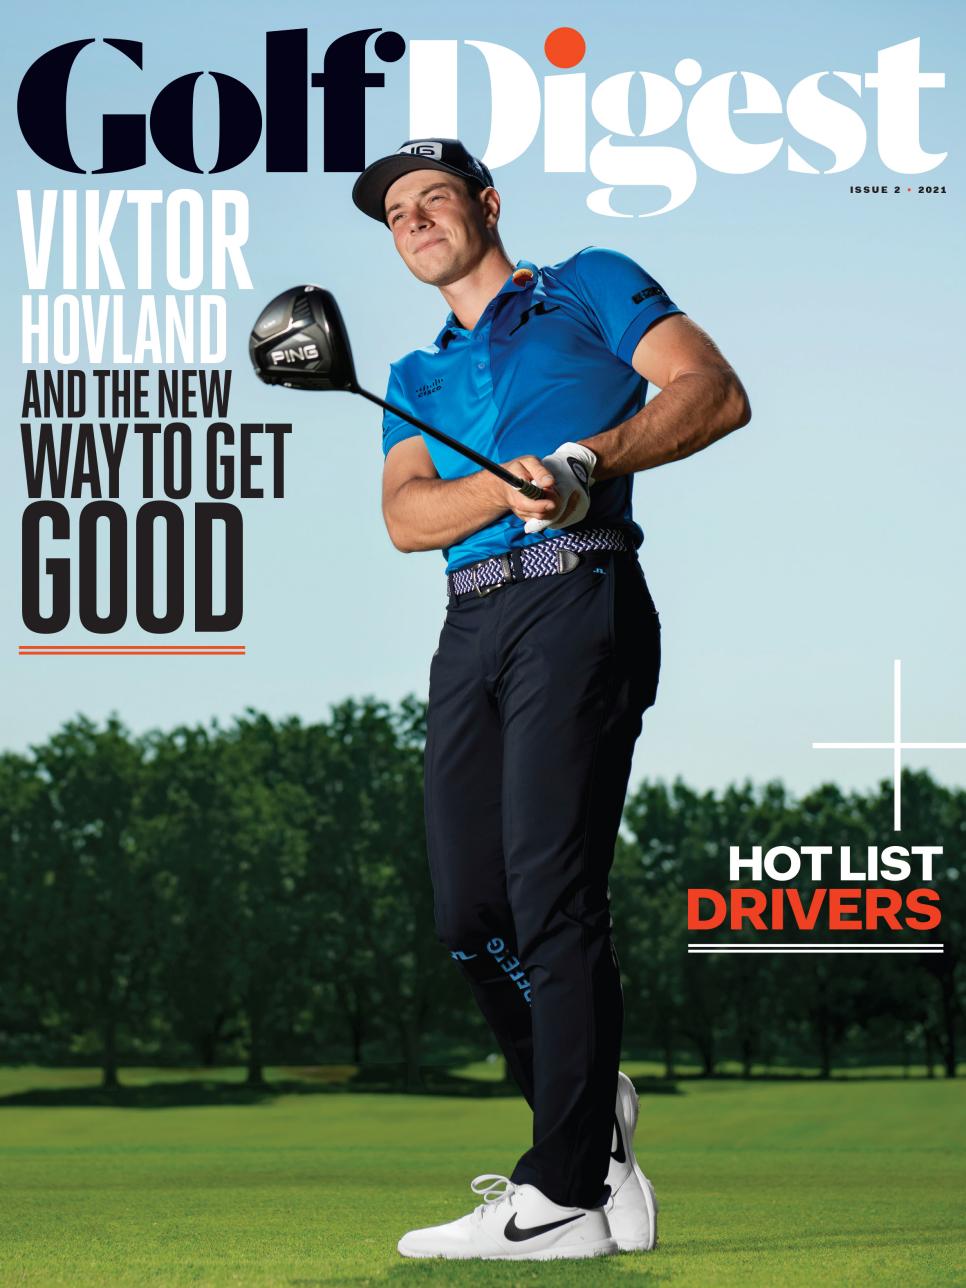 The intriguing rise of Viktor Hovland and how he developed his swing on